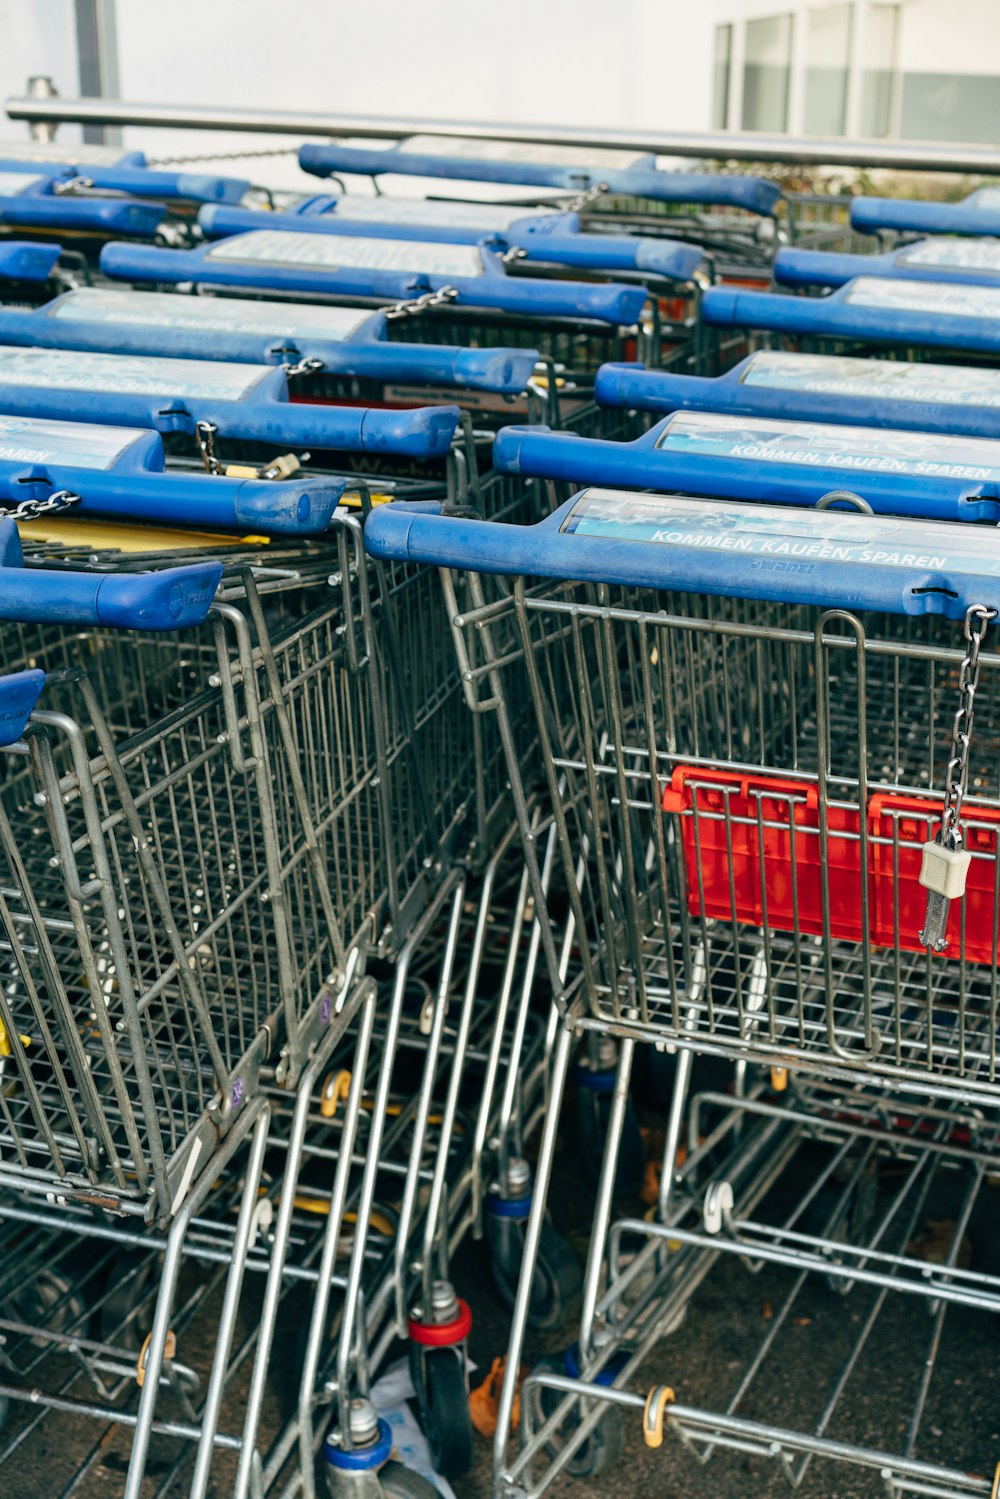 a row of shopping carts with blue handles